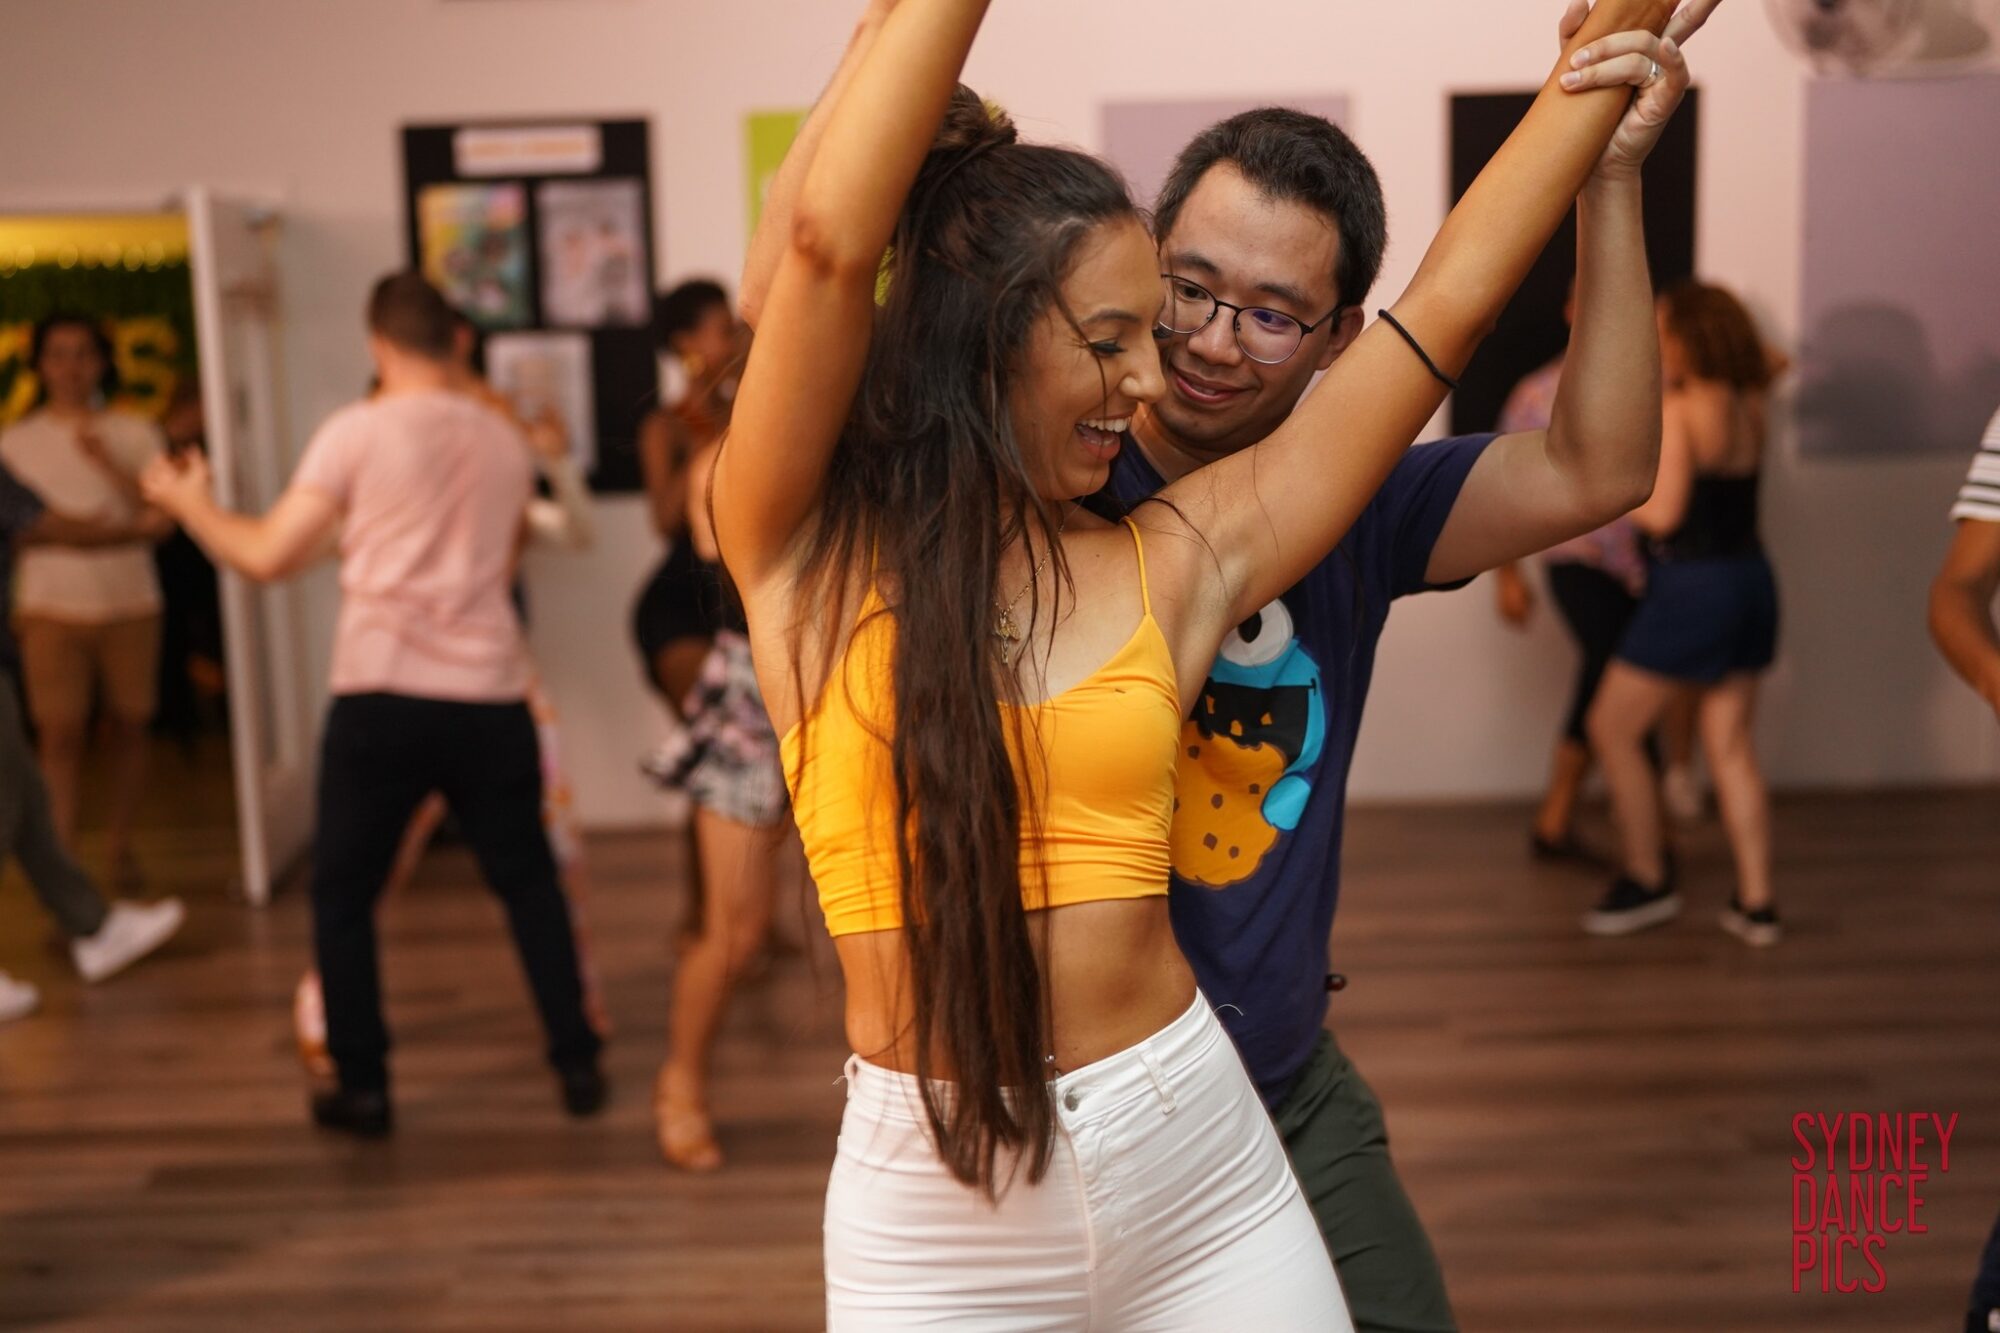 Bachata classes in Sydney - Bachateros